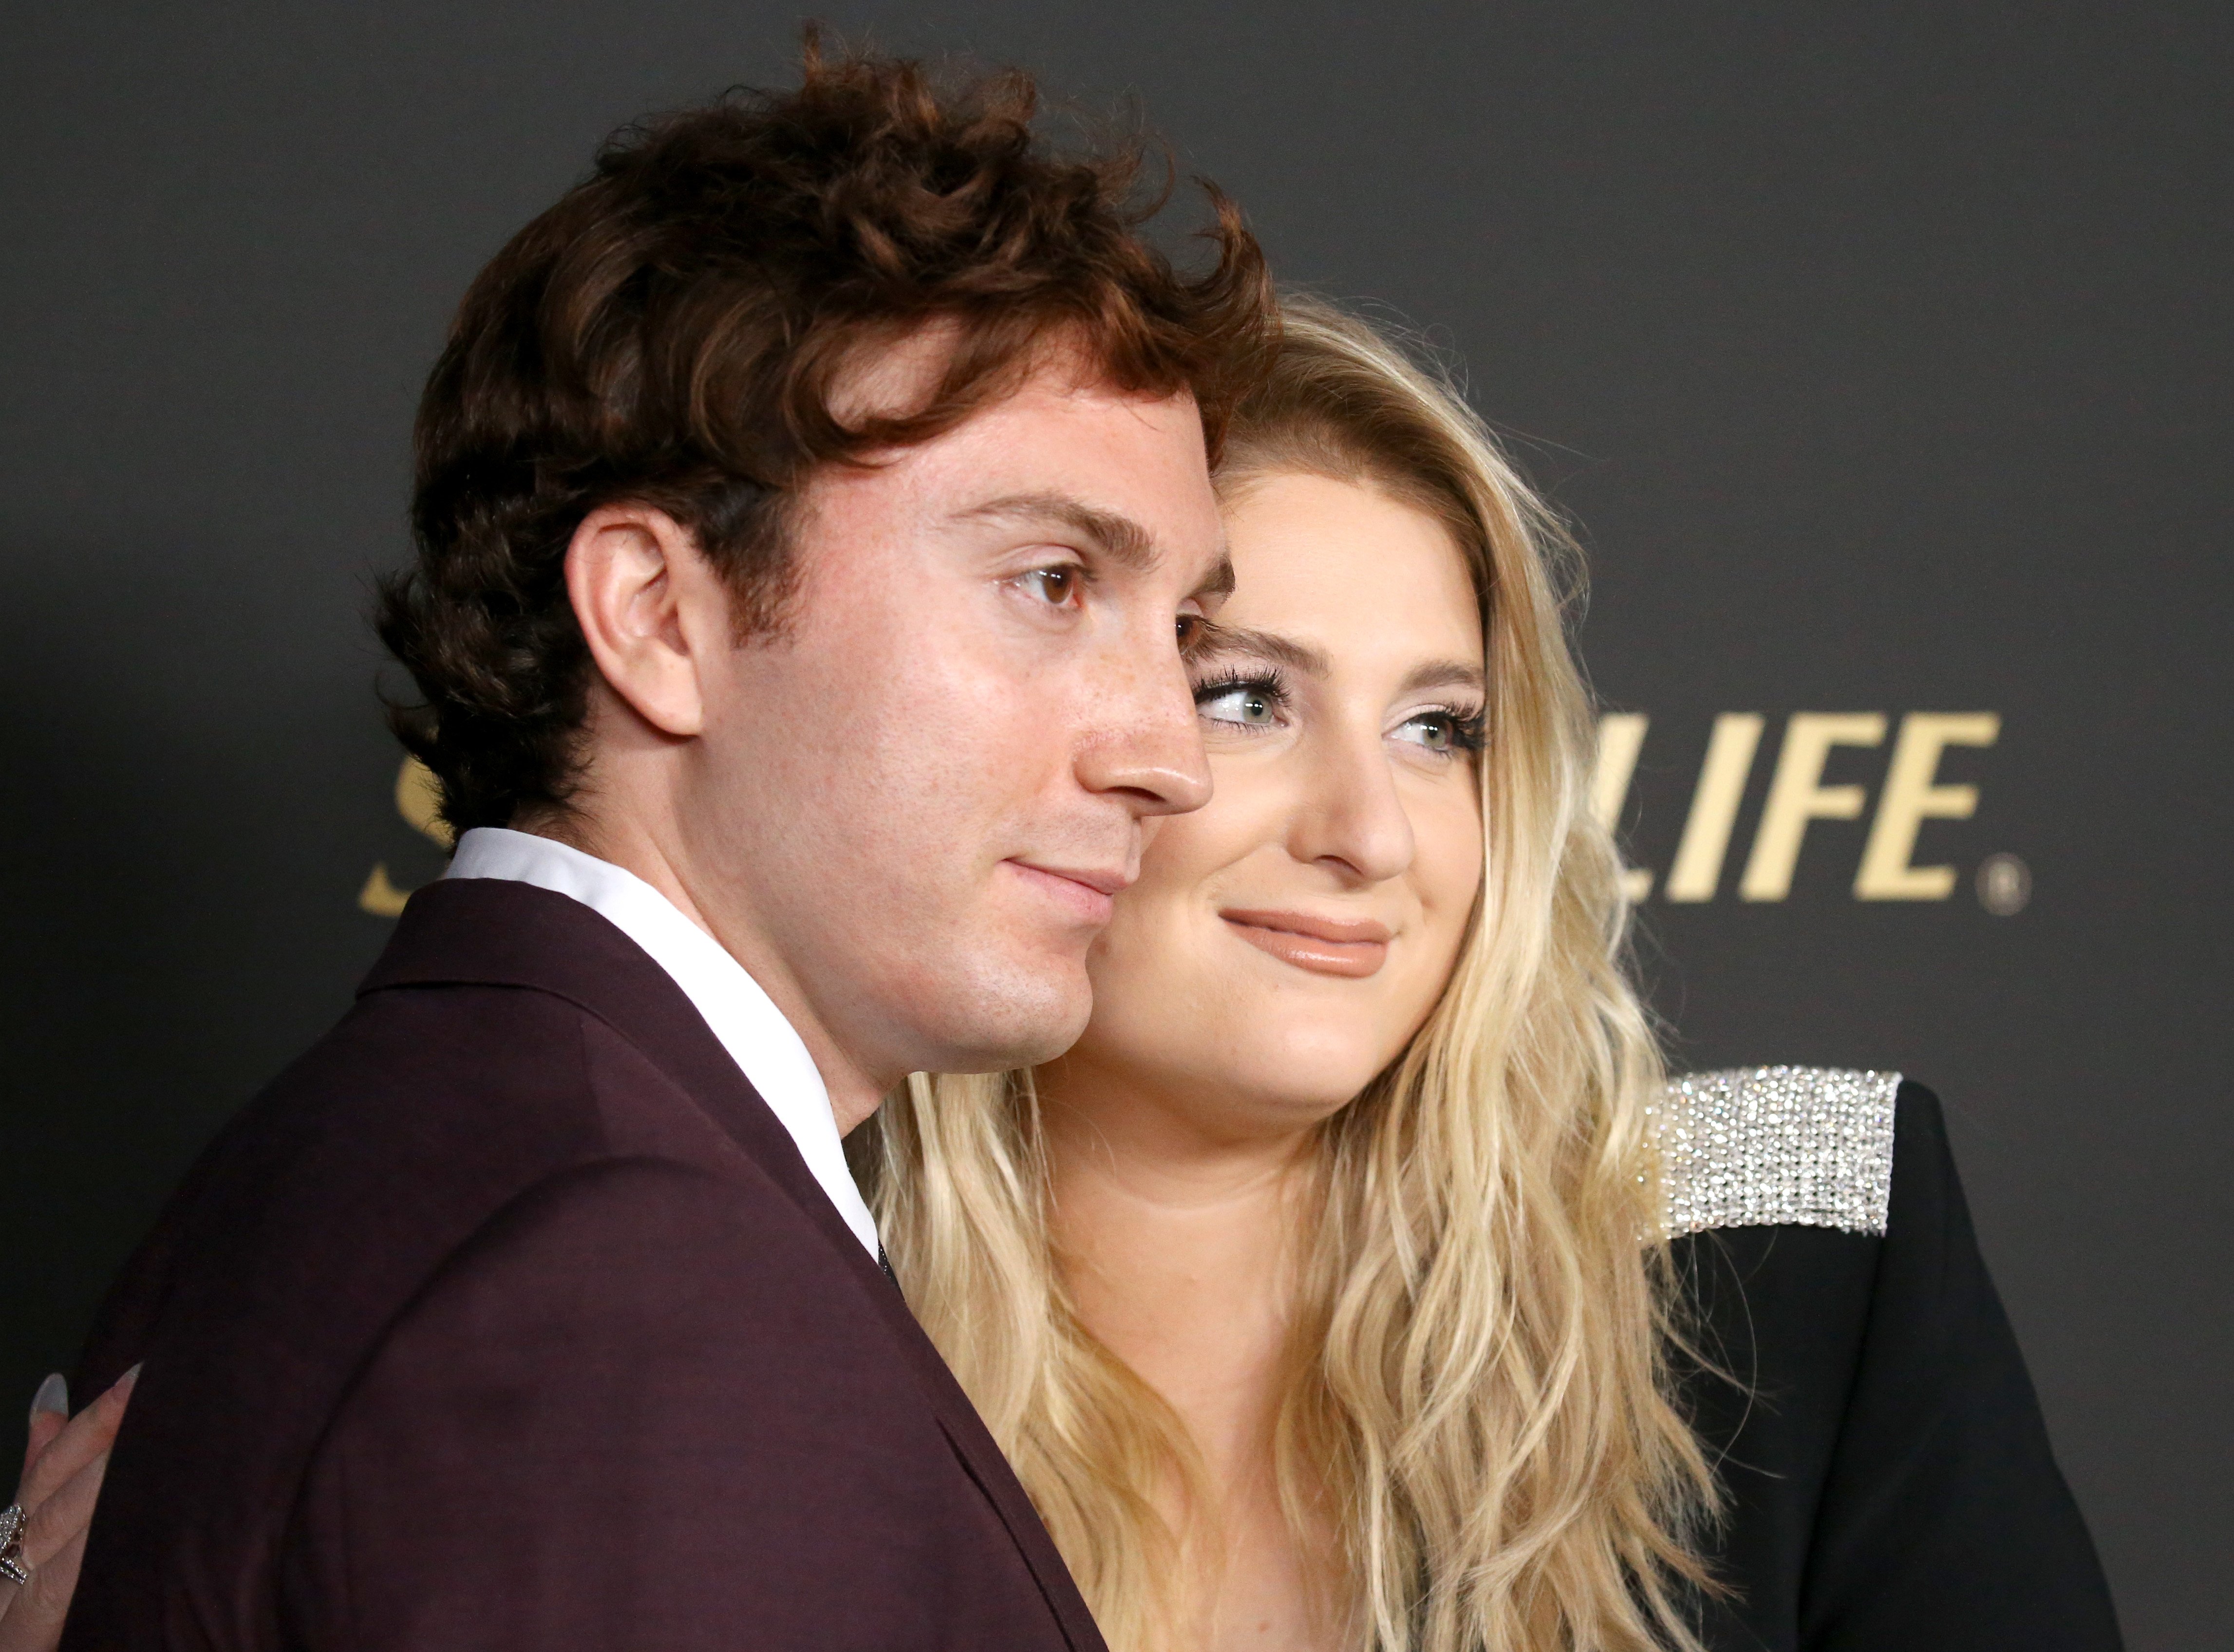 Daryl Sabara and Meghan Trainor attend the City Of Hope's Spirit of Life 2019 Gala on October 10, 2019 in Santa Monica, California | Source: Getty Images